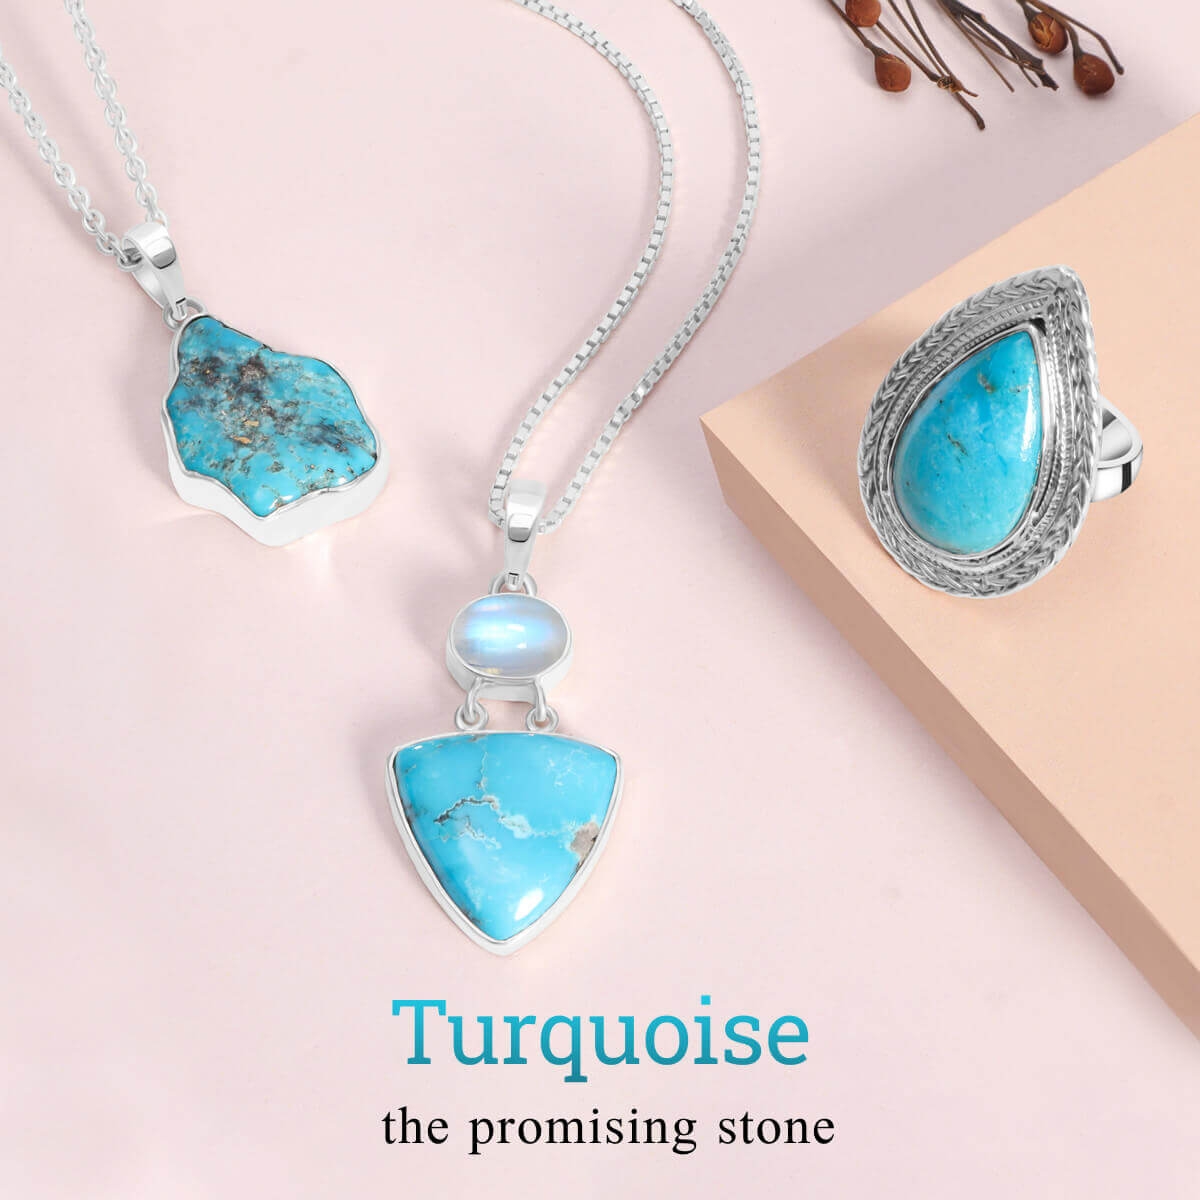 Turquoise - the promising stone